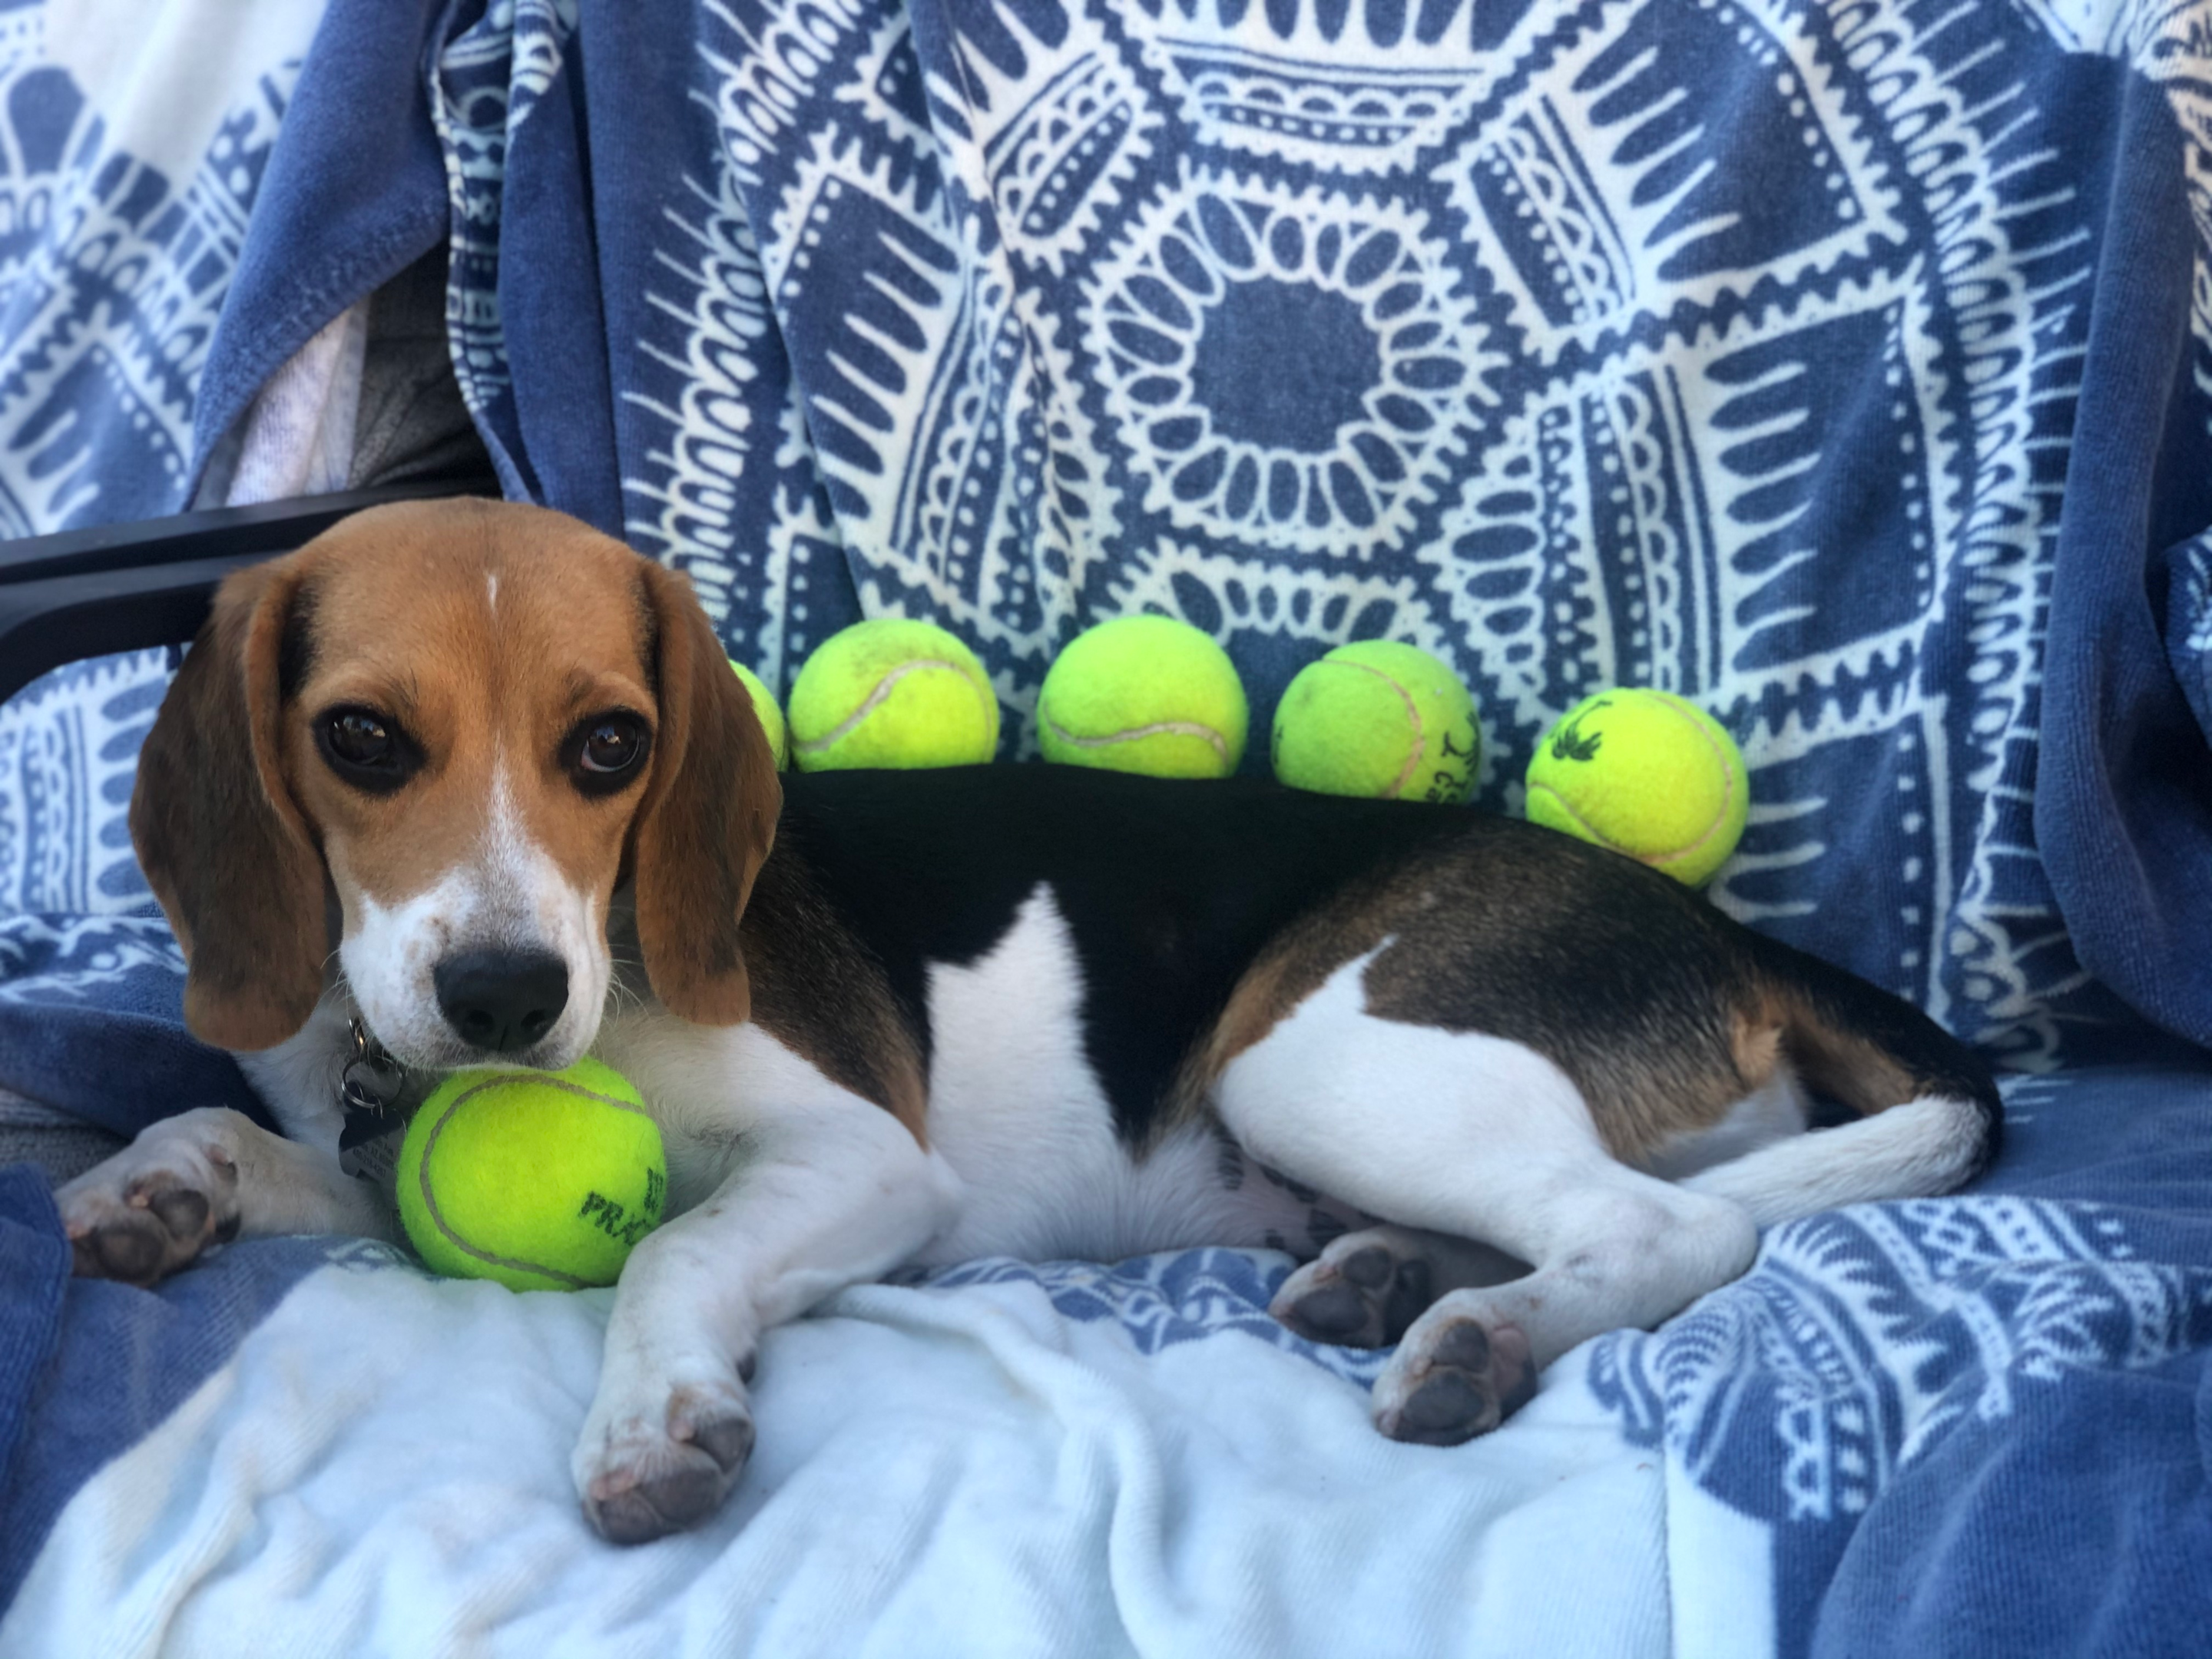 Beagle laying on a couch with baseballs